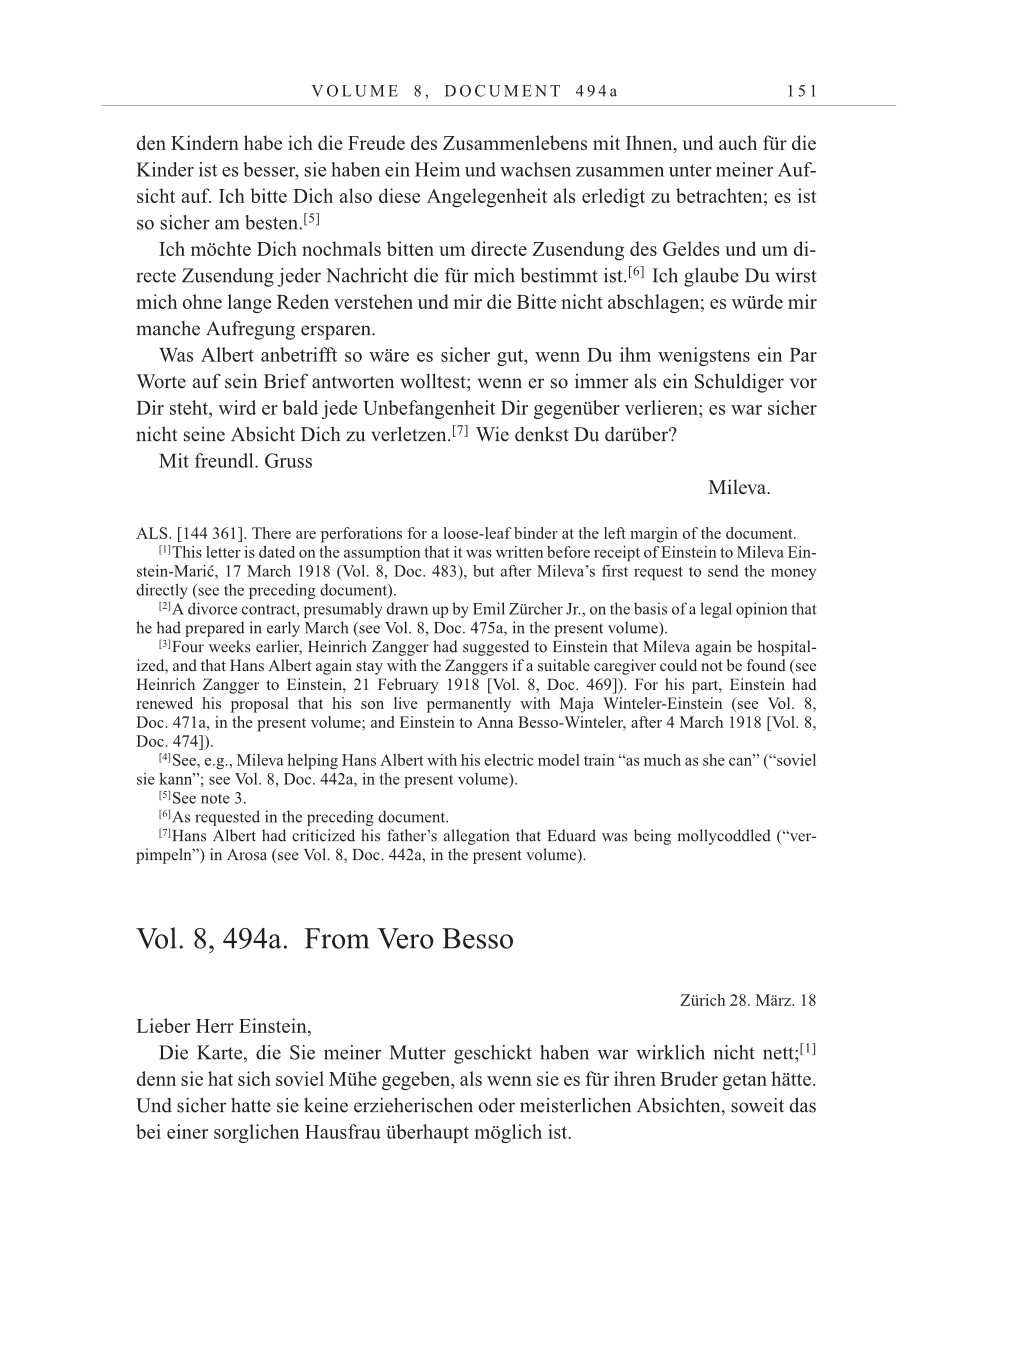 Volume 10: The Berlin Years: Correspondence May-December 1920 / Supplementary Correspondence 1909-1920 page 151